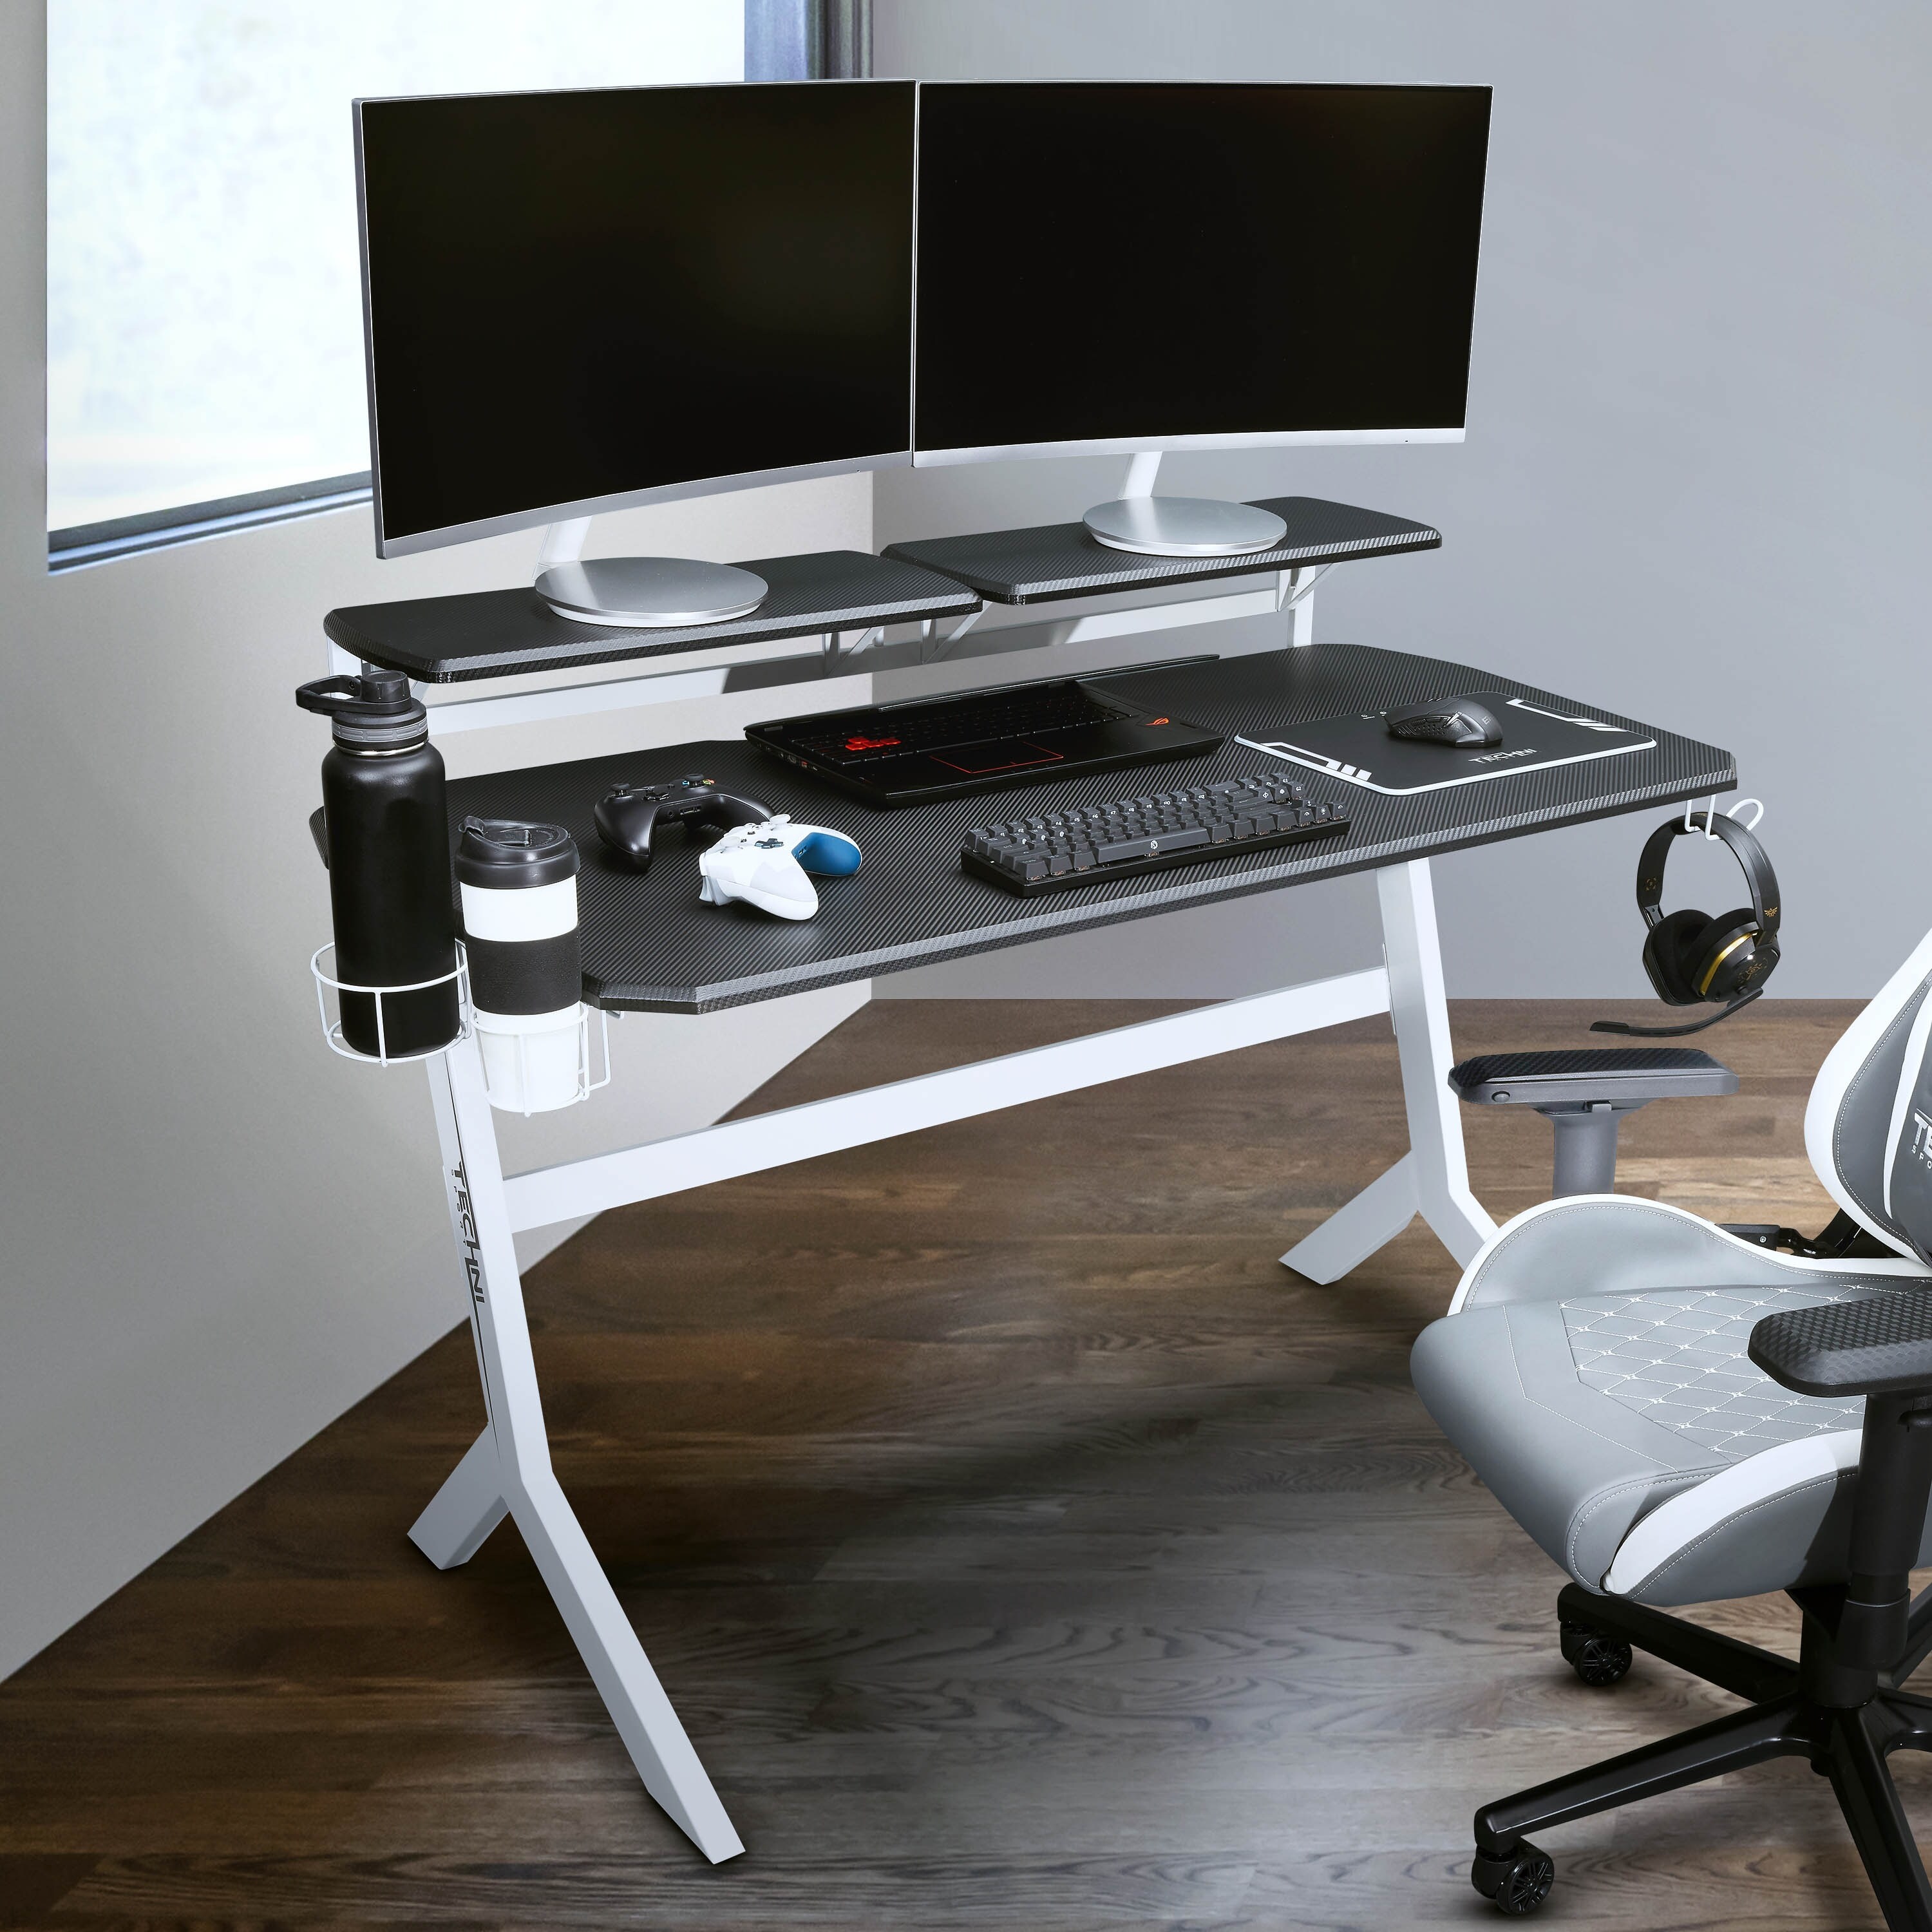 https://ak1.ostkcdn.com/images/products/is/images/direct/1e405ba9fef66950e23eed9bfbc3ffd21d919bab/Sport-Gaming-Desk-Two-Way-Computer-Desk-with-Elevated-Monitor-Stands-CD-Rack-Cup-Holder-%26-Accessories-Storage-Laptop-Workstation.jpg